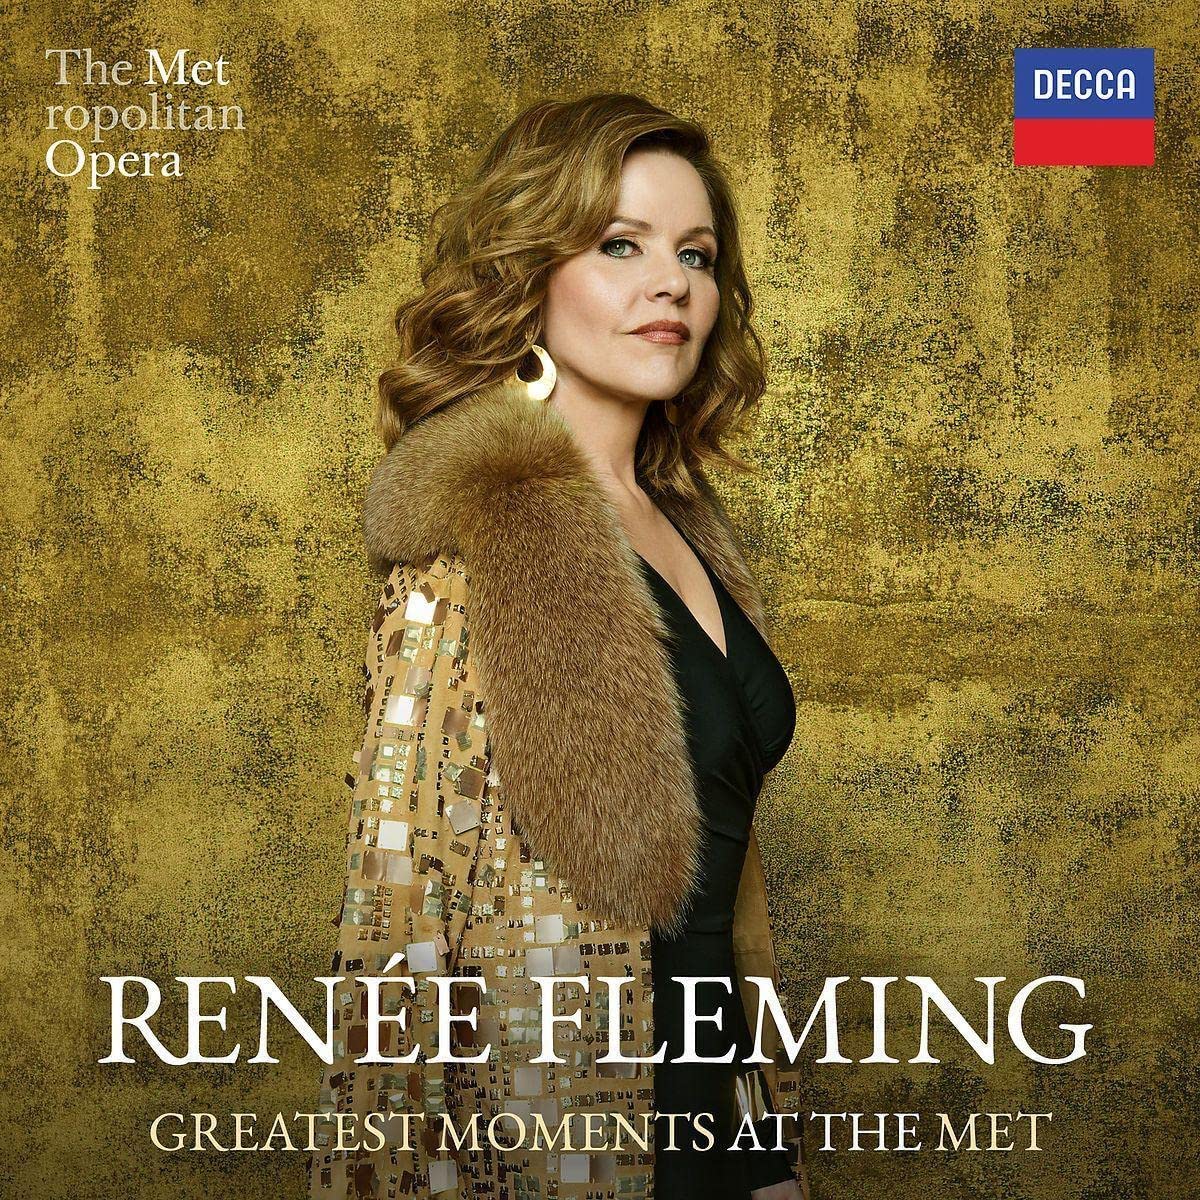 Renee Fleming: Her Greatest Moments at the MET